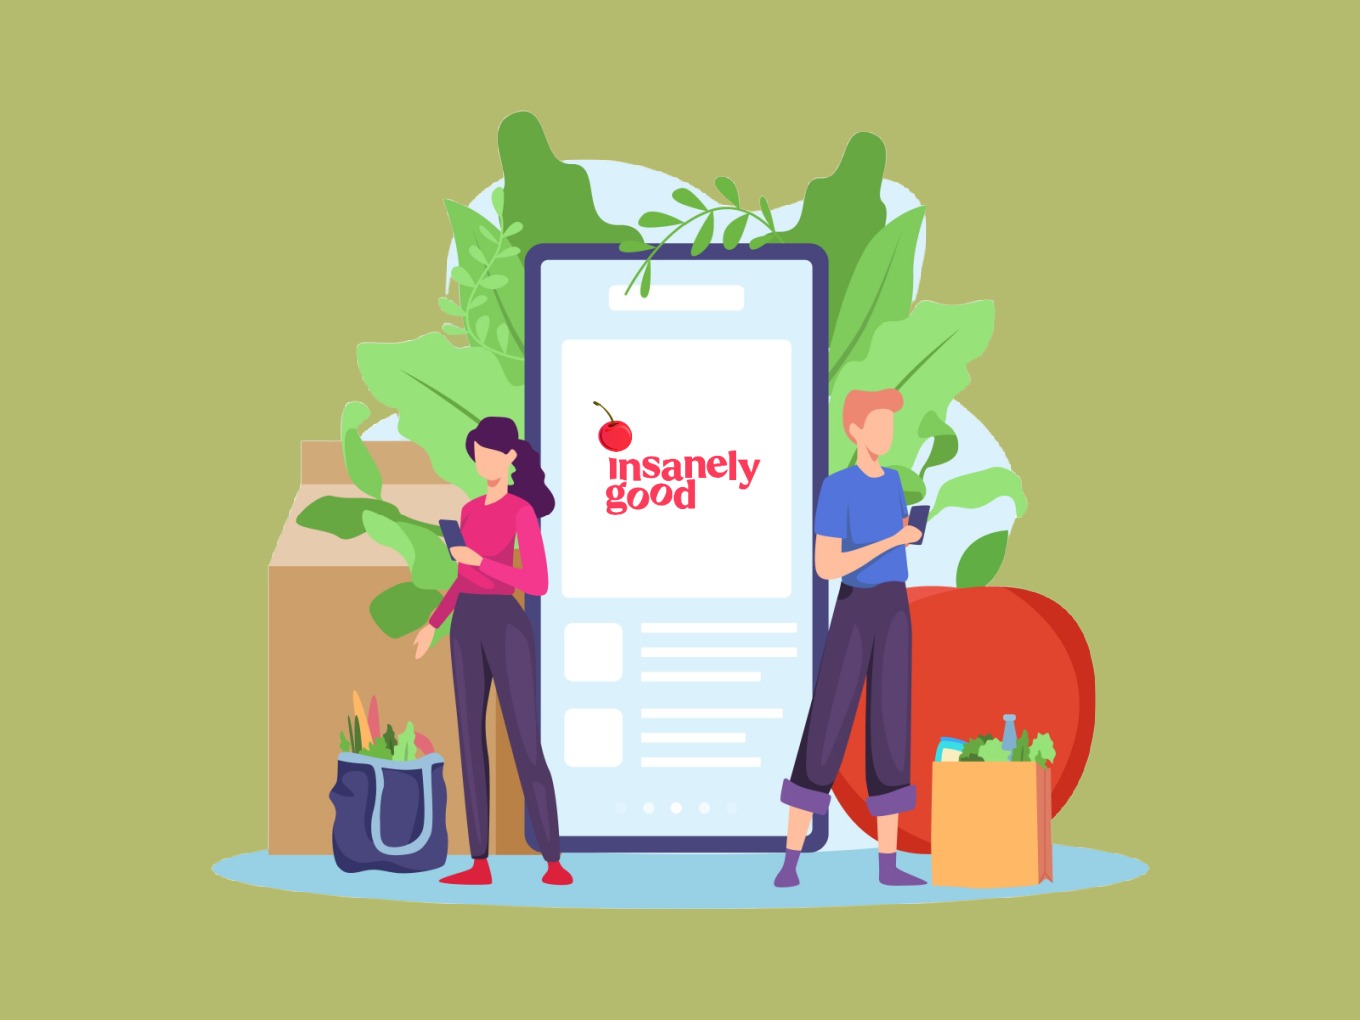 Swiggy rebranded its subscription-based grocery delivery service, SuprDaily, as 